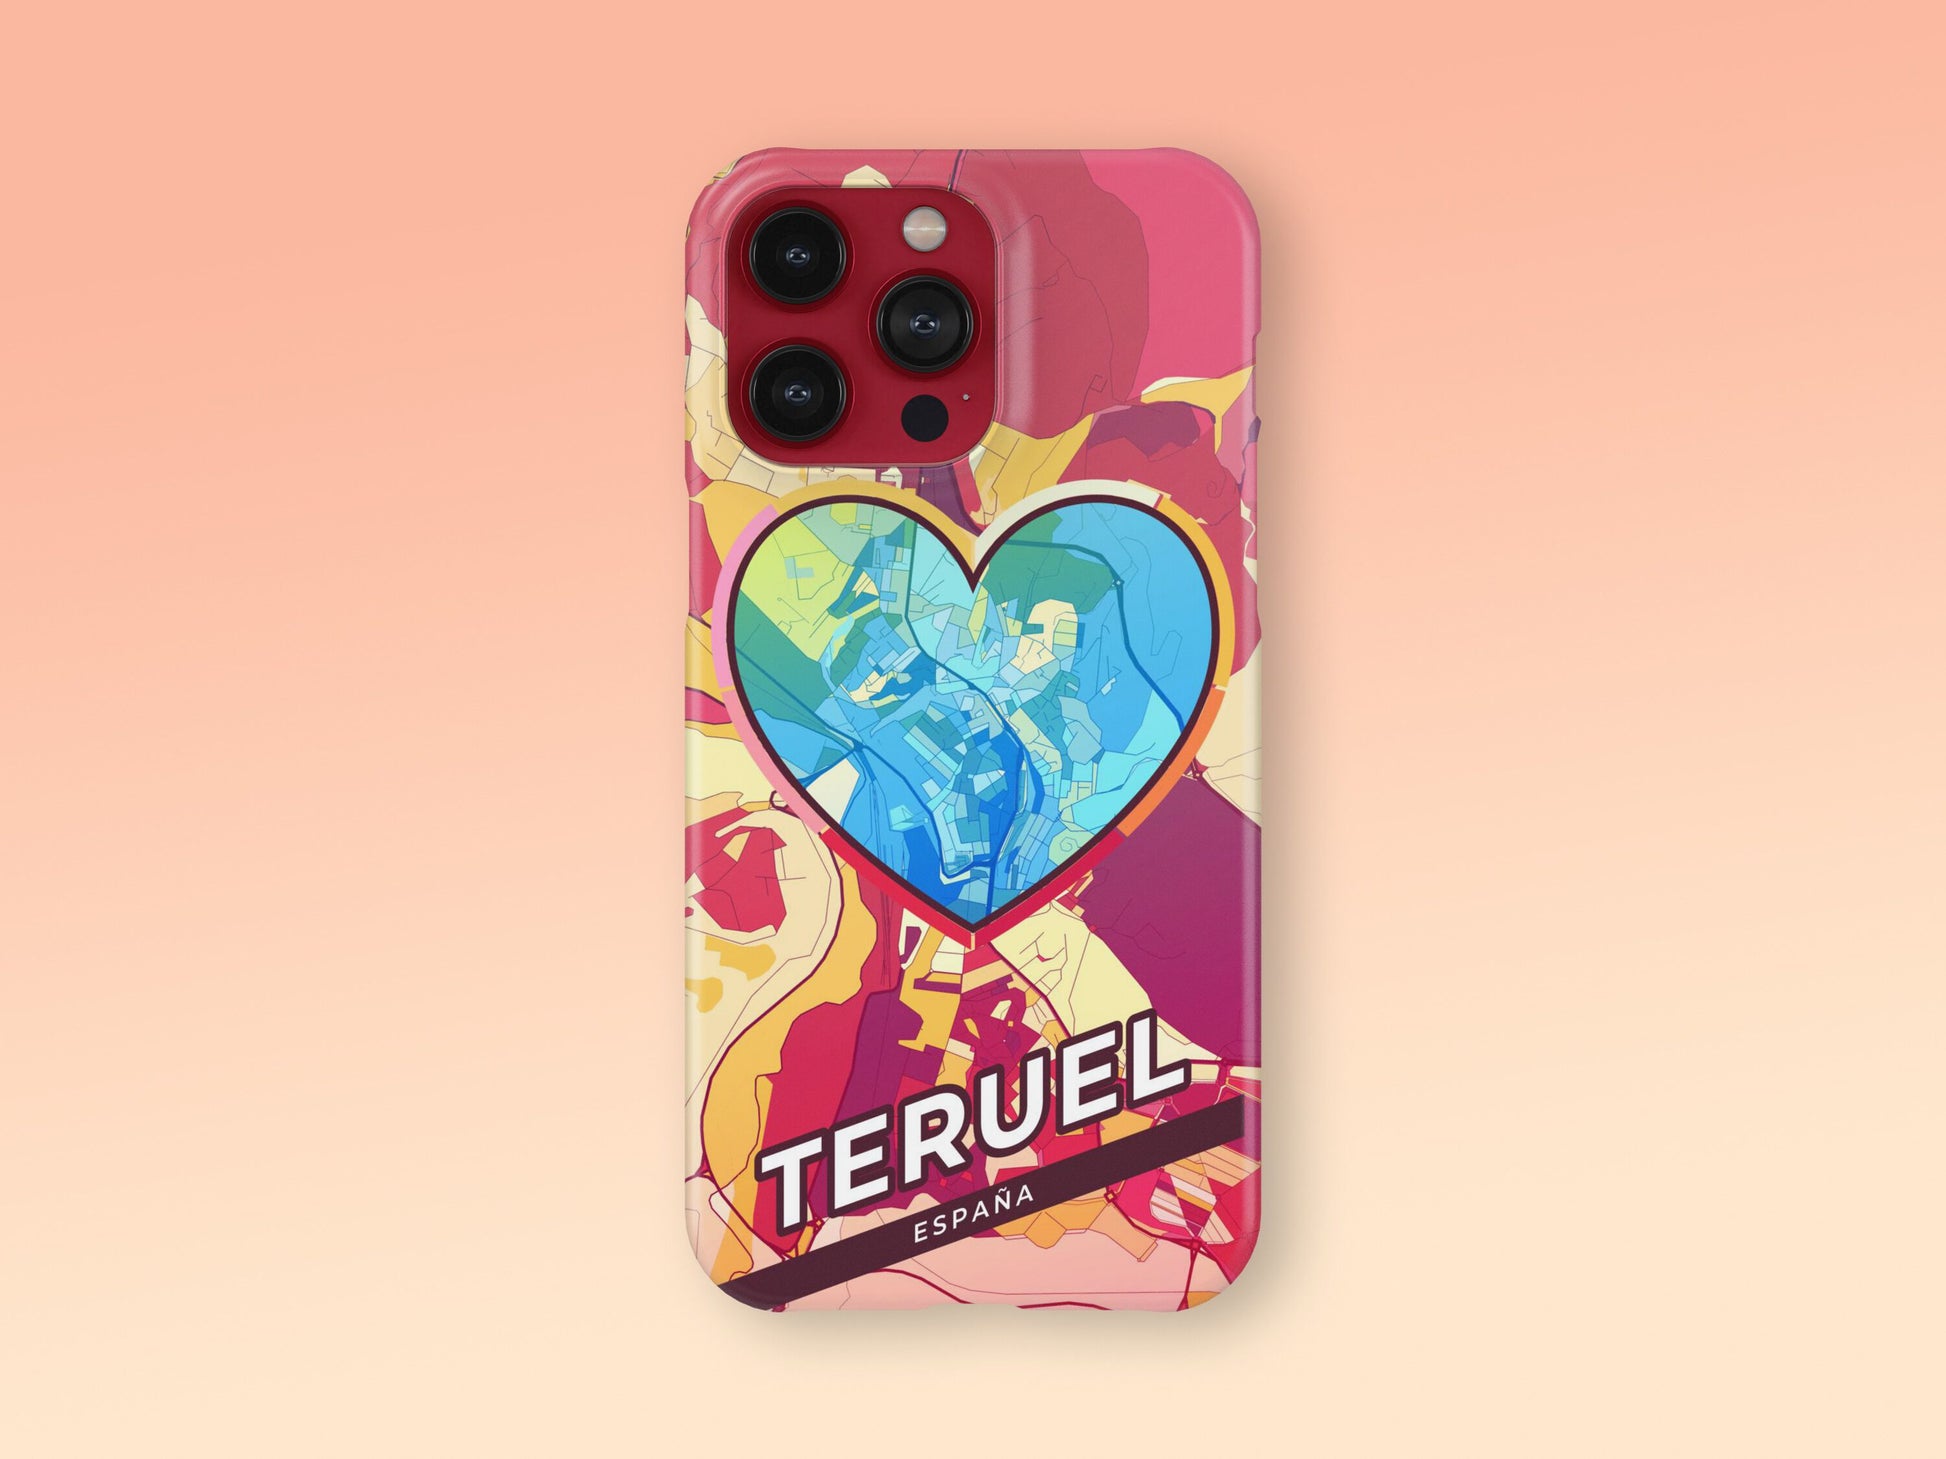 Teruel Spain slim phone case with colorful icon. Birthday, wedding or housewarming gift. Couple match cases. 2